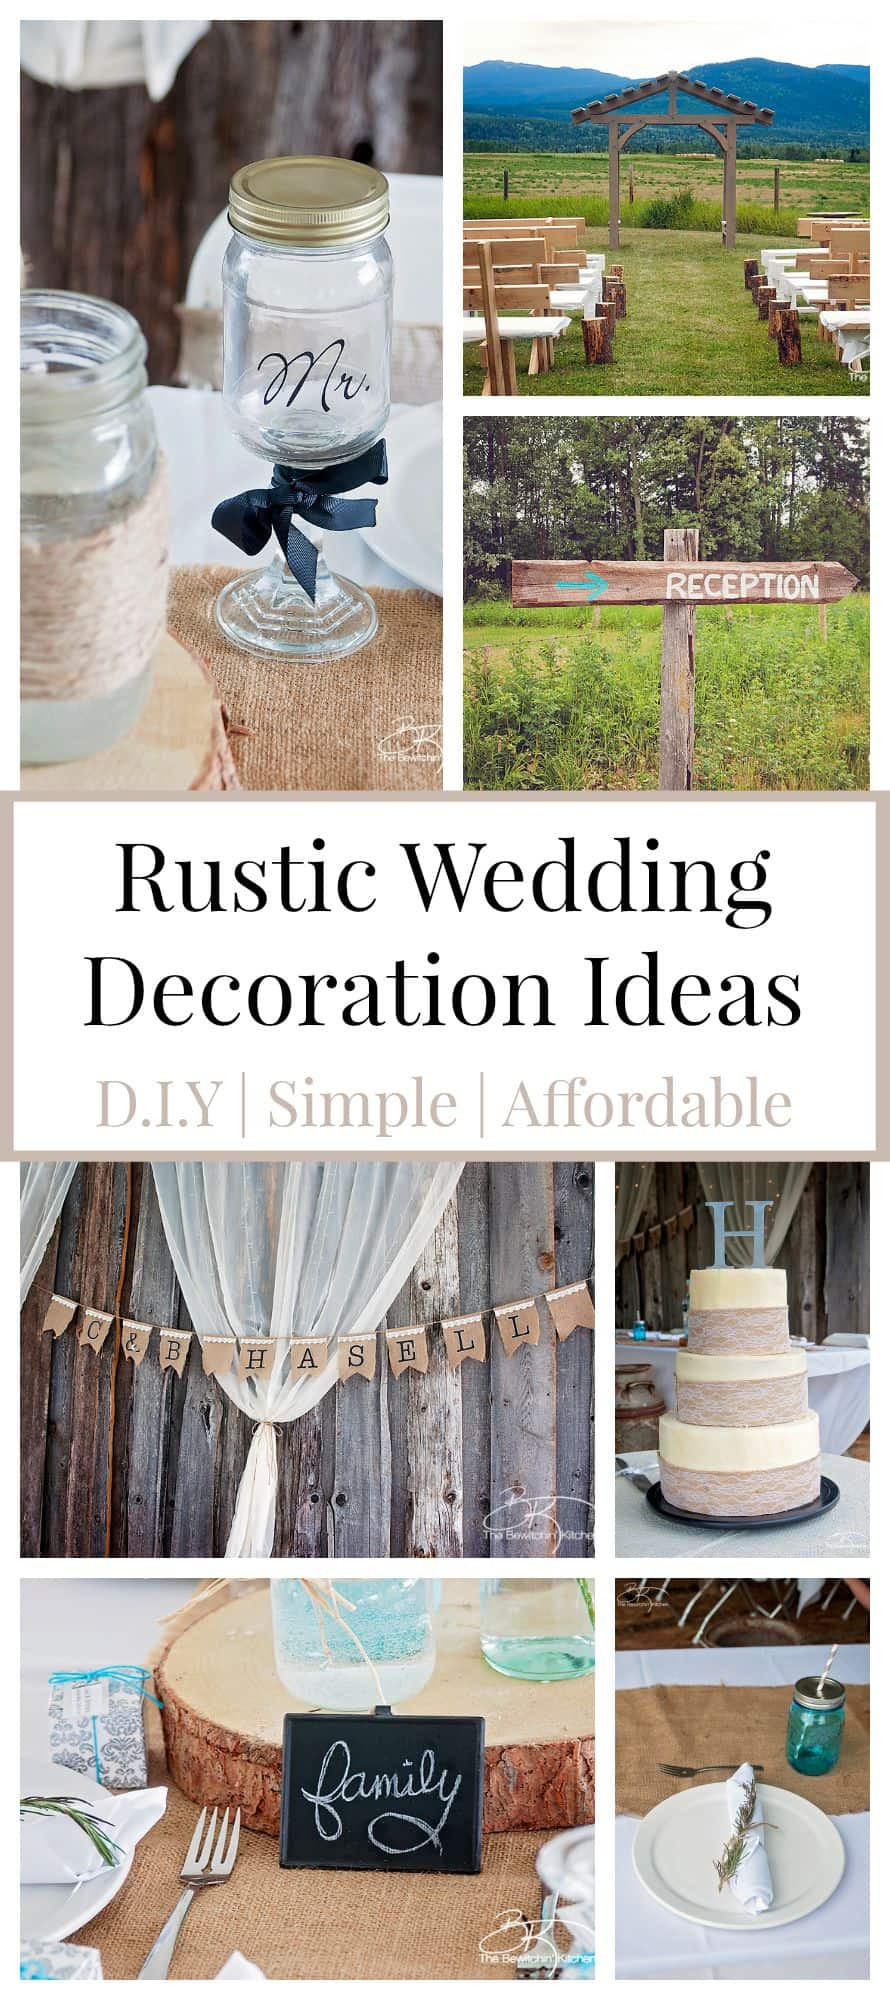 DIY Rustic Wedding Ideas
 Rustic Wedding Ideas That Are DIY & Affordable